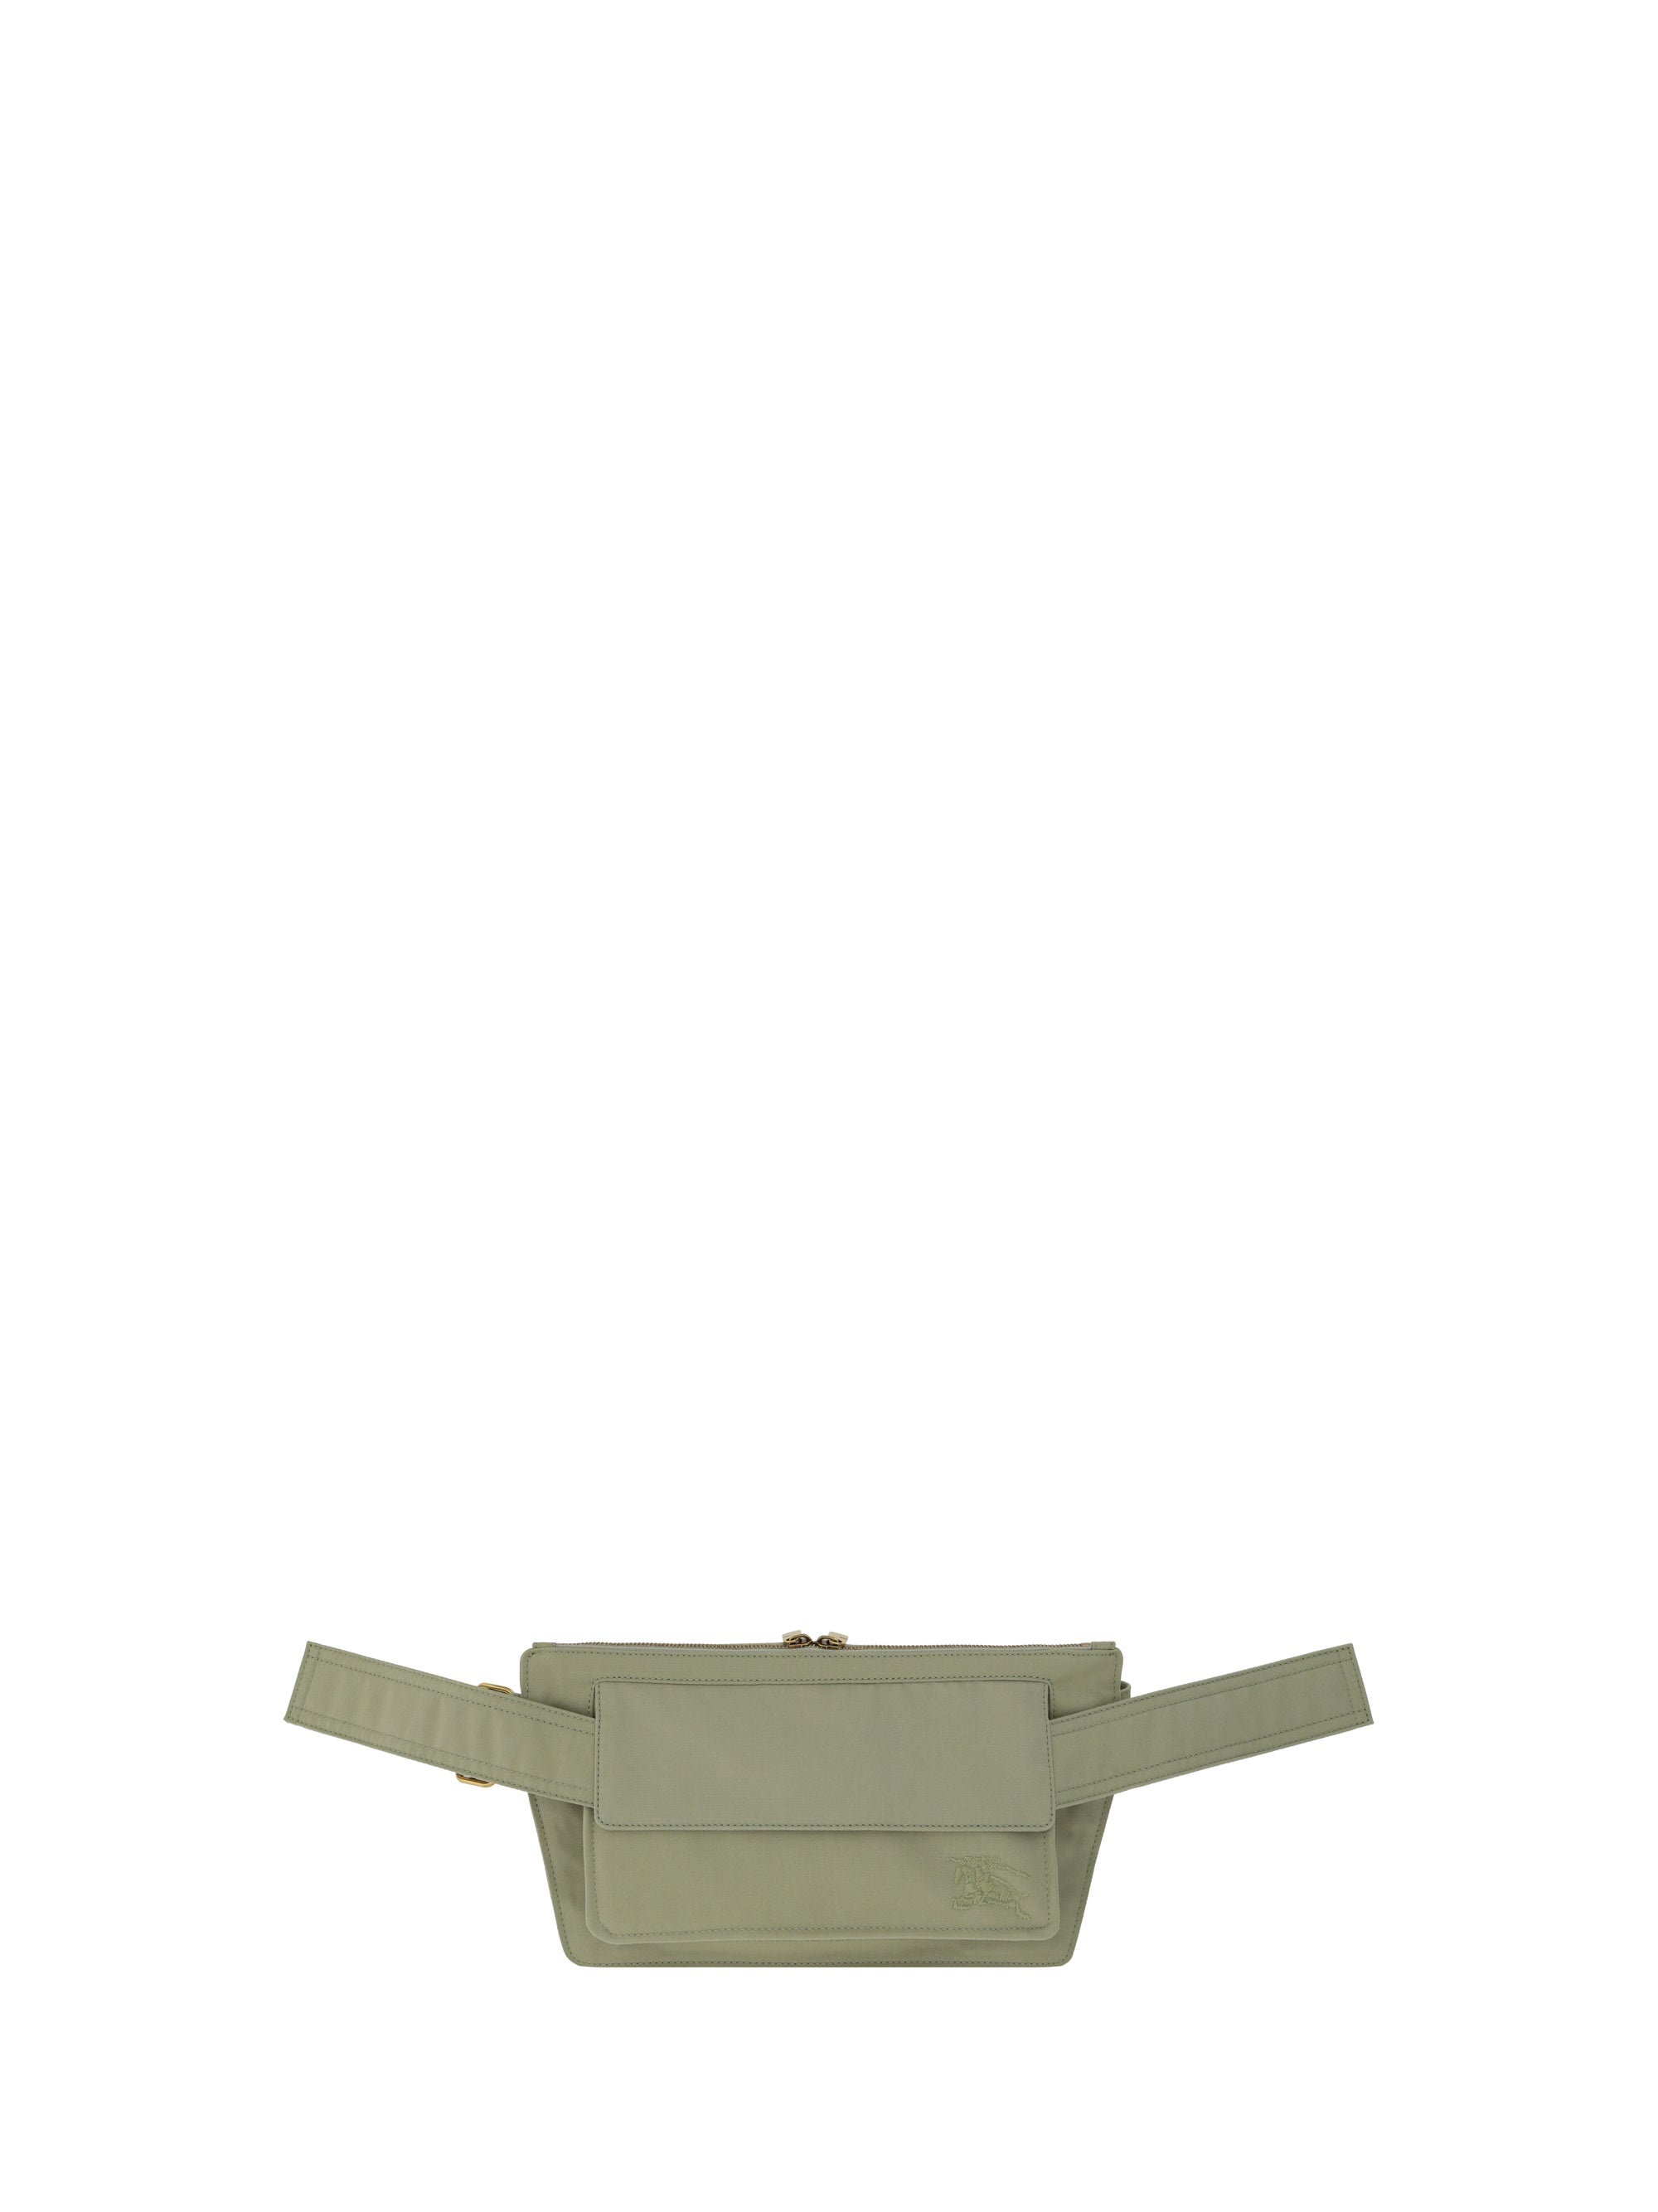 Burberry Men Trench Fanny Pack - 1